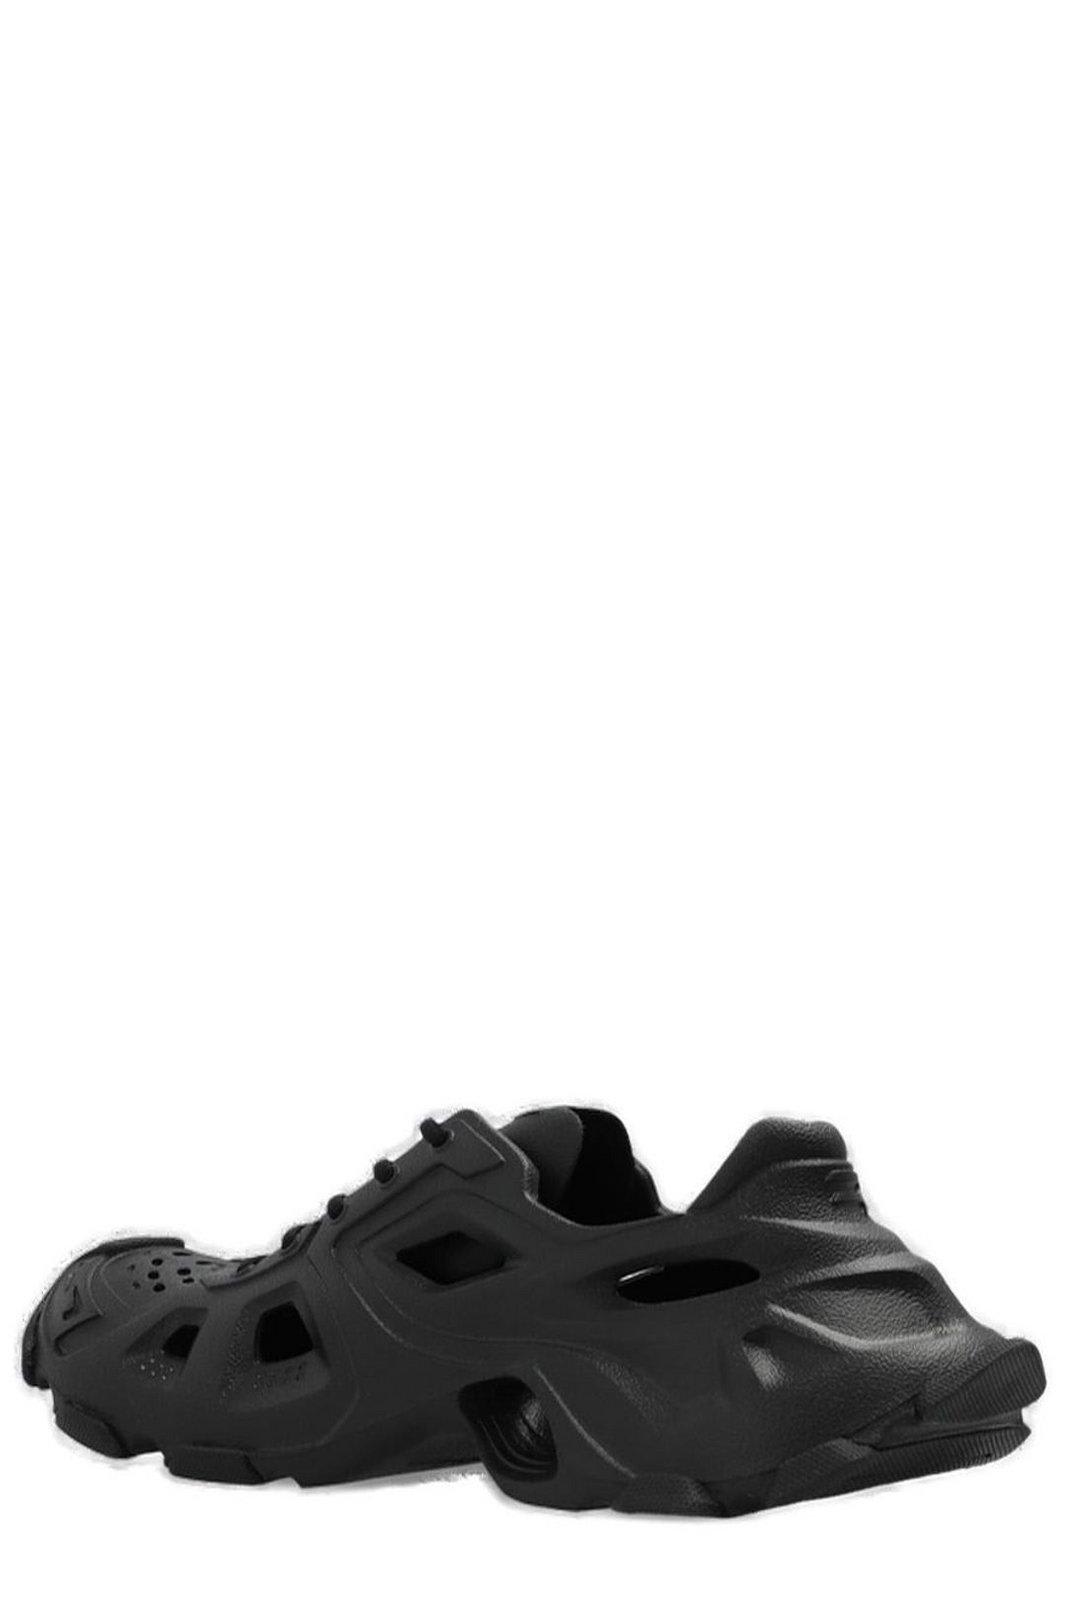 Shop Balenciaga Hd Laced Cut-out Sneakers In Black